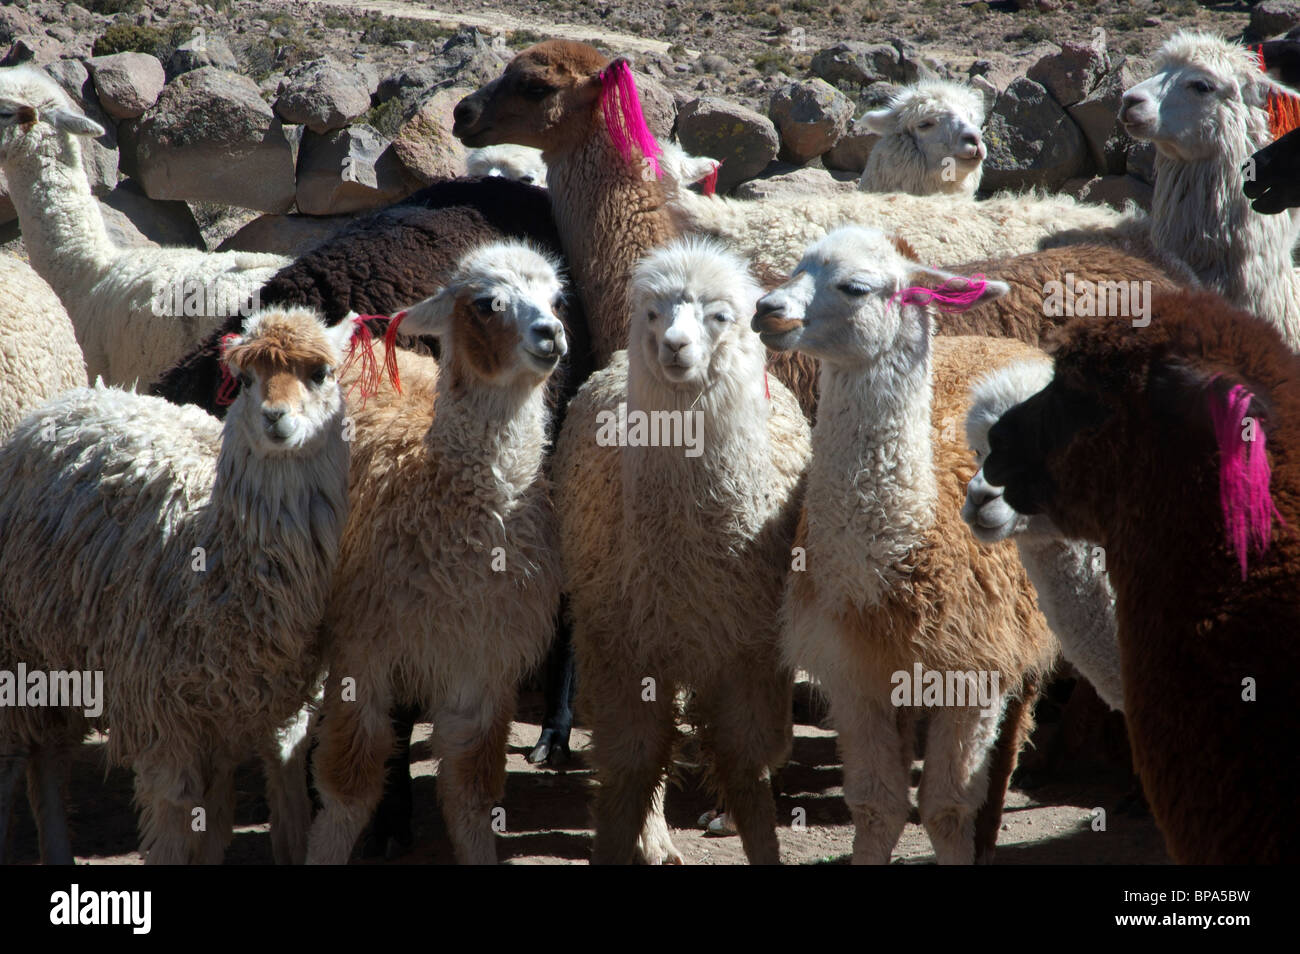 Alpacas, Vicugna pacos, with colourful ear identification tags, on show for tourists, near Arequipa, Peru. Stock Photo